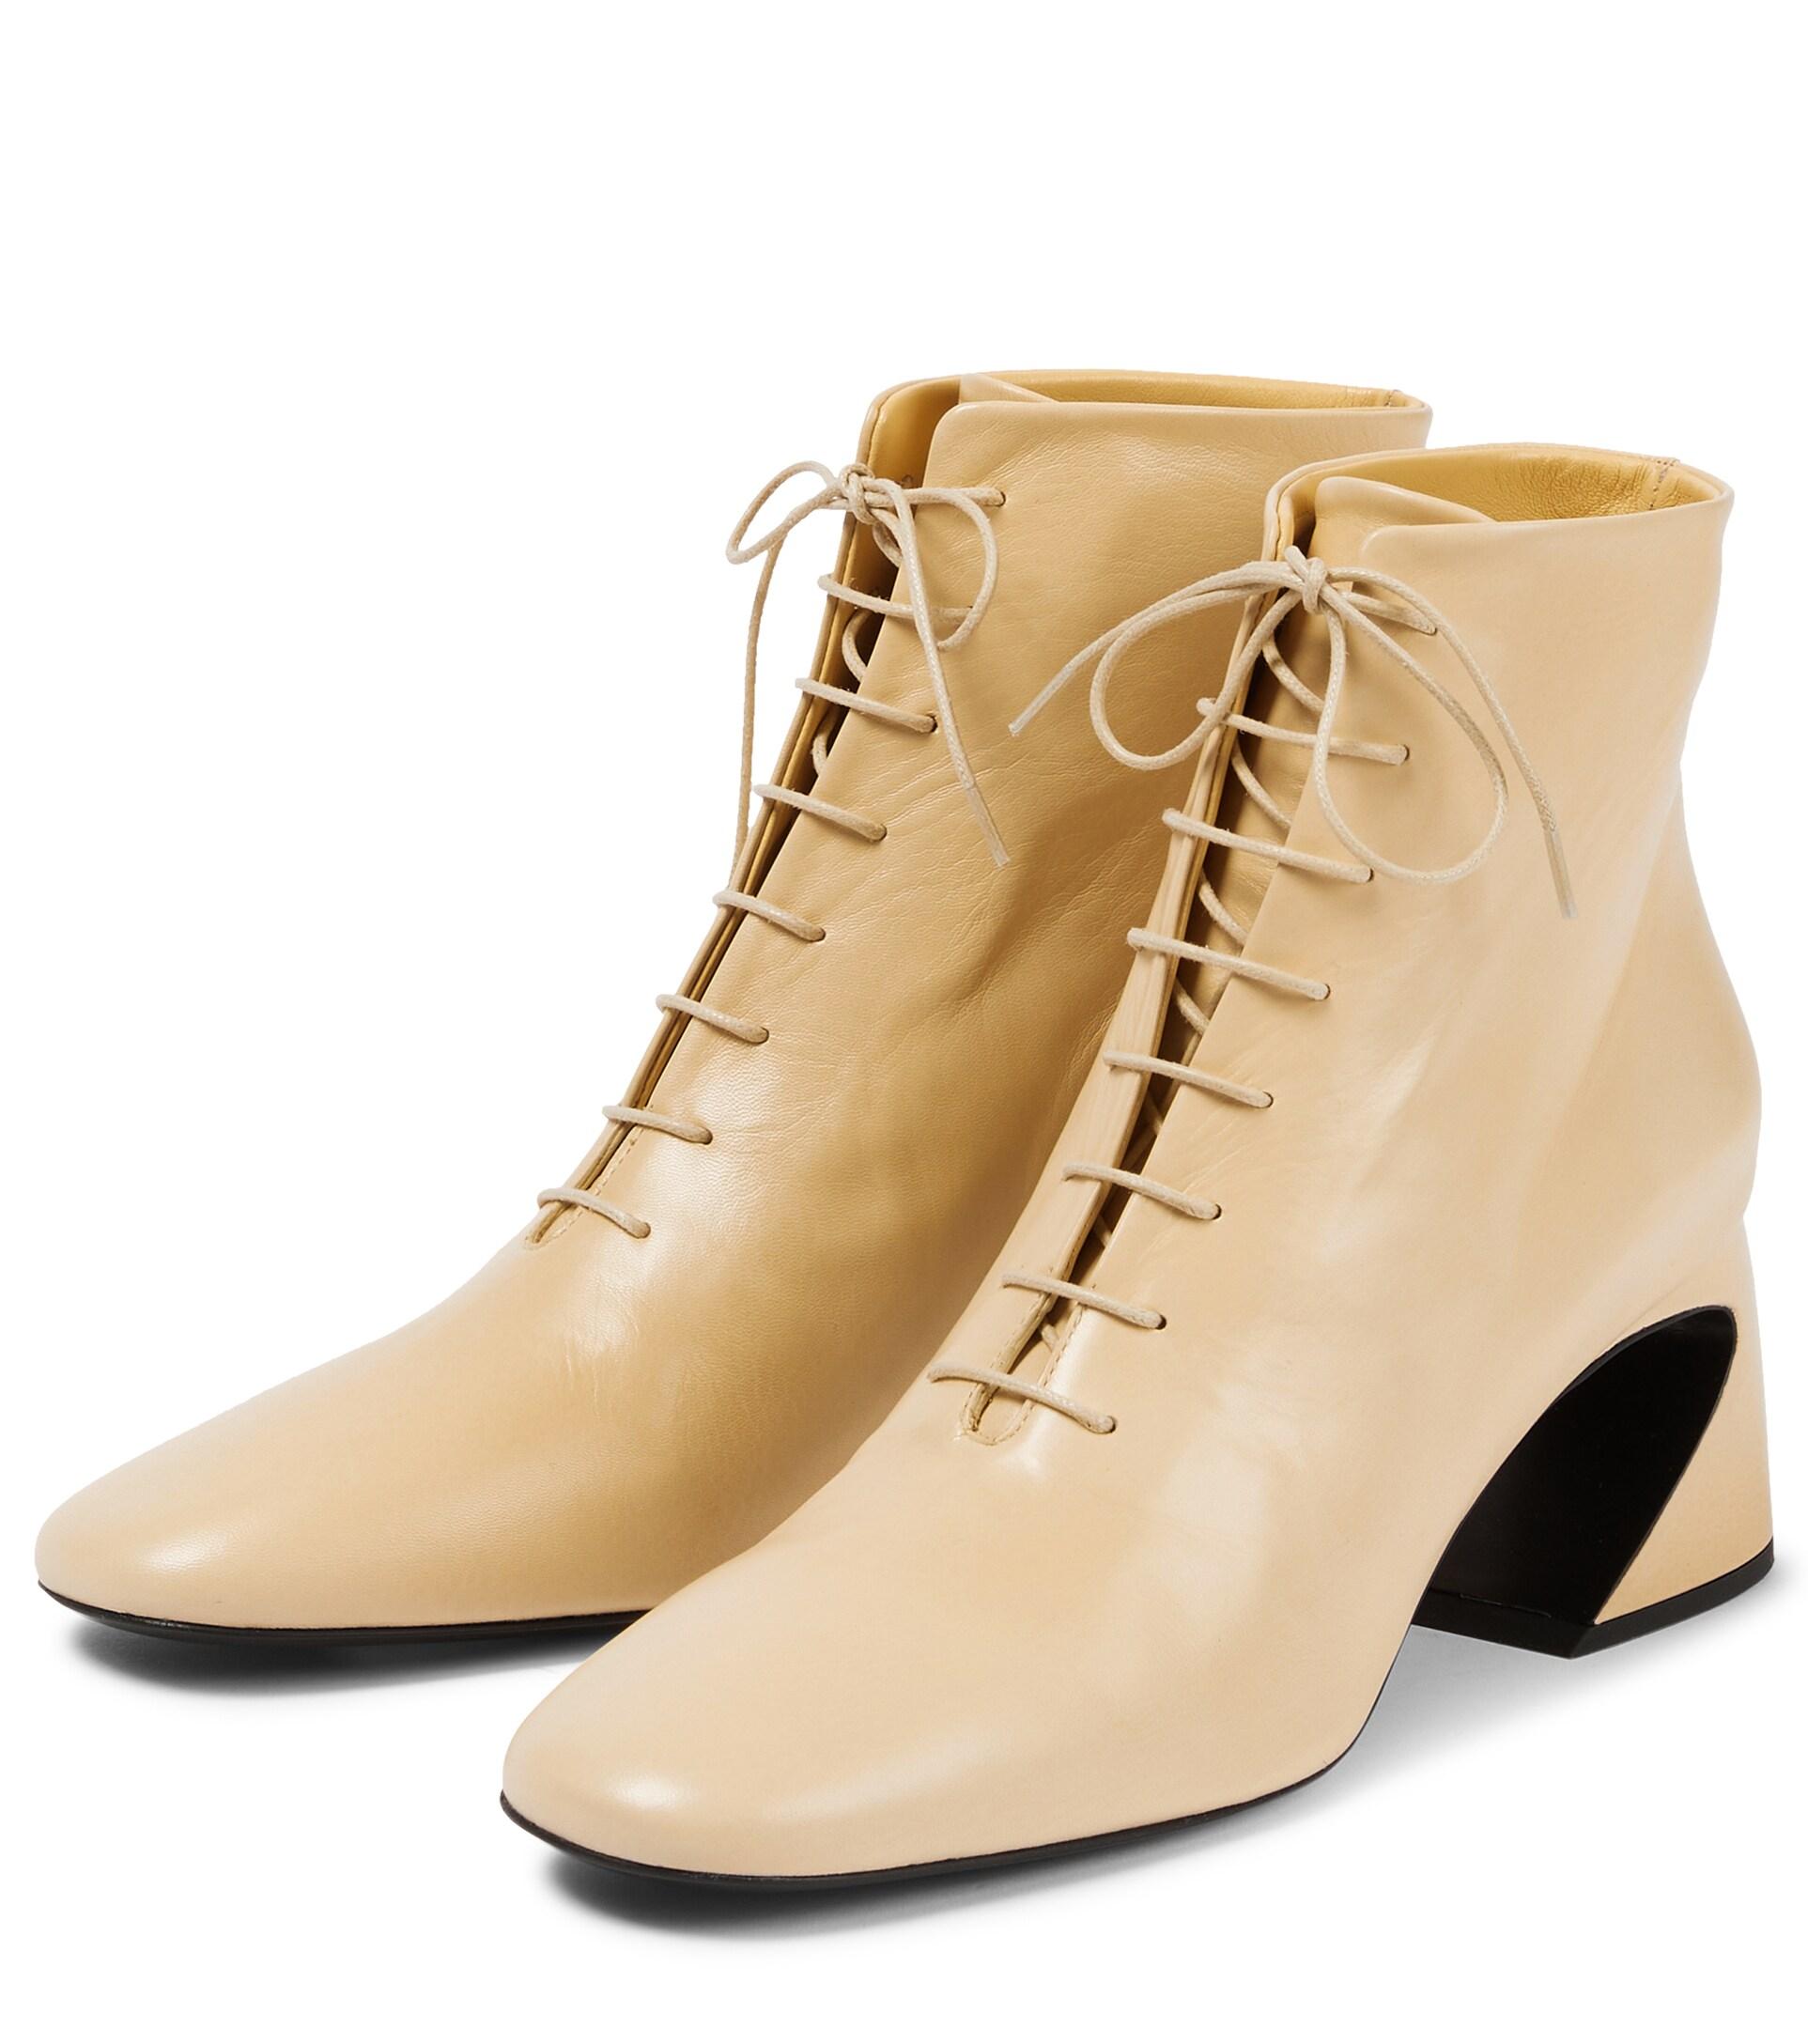 Jil Sander Leather Ankle Boots in Beige (Natural) - Save 30% | Lyst